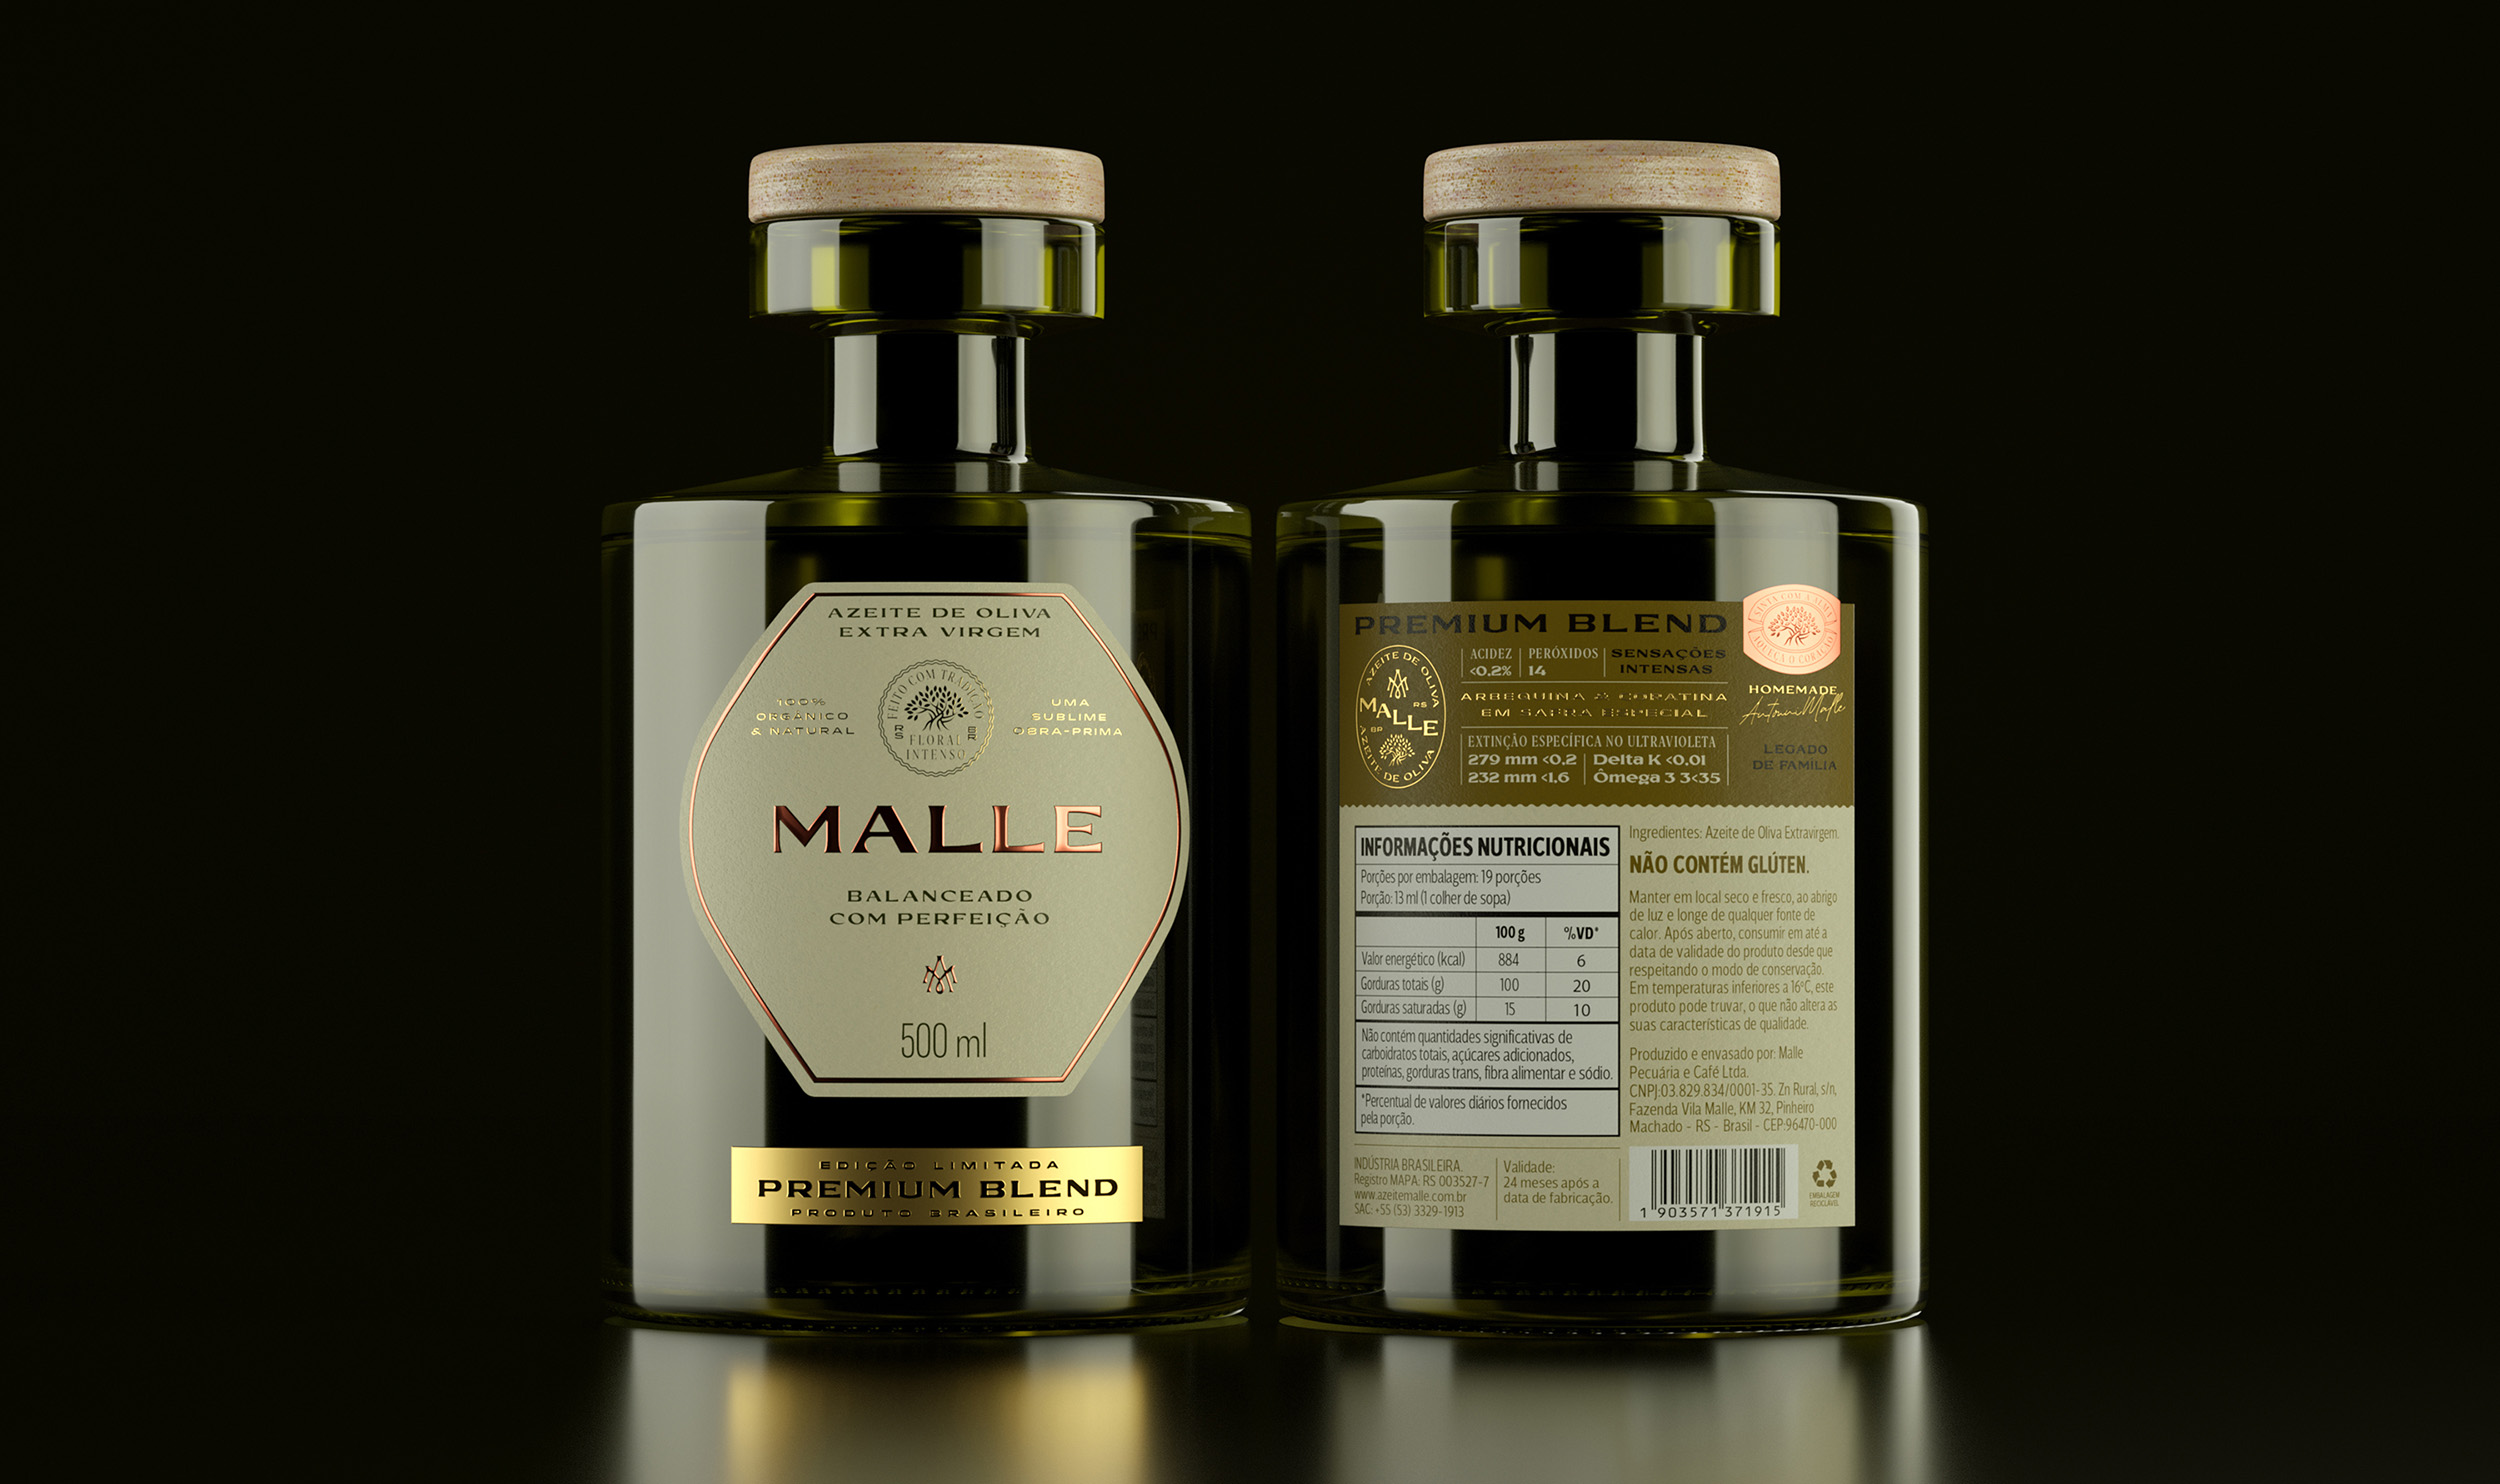 Malle Olive Oil Branding and Packaging Design